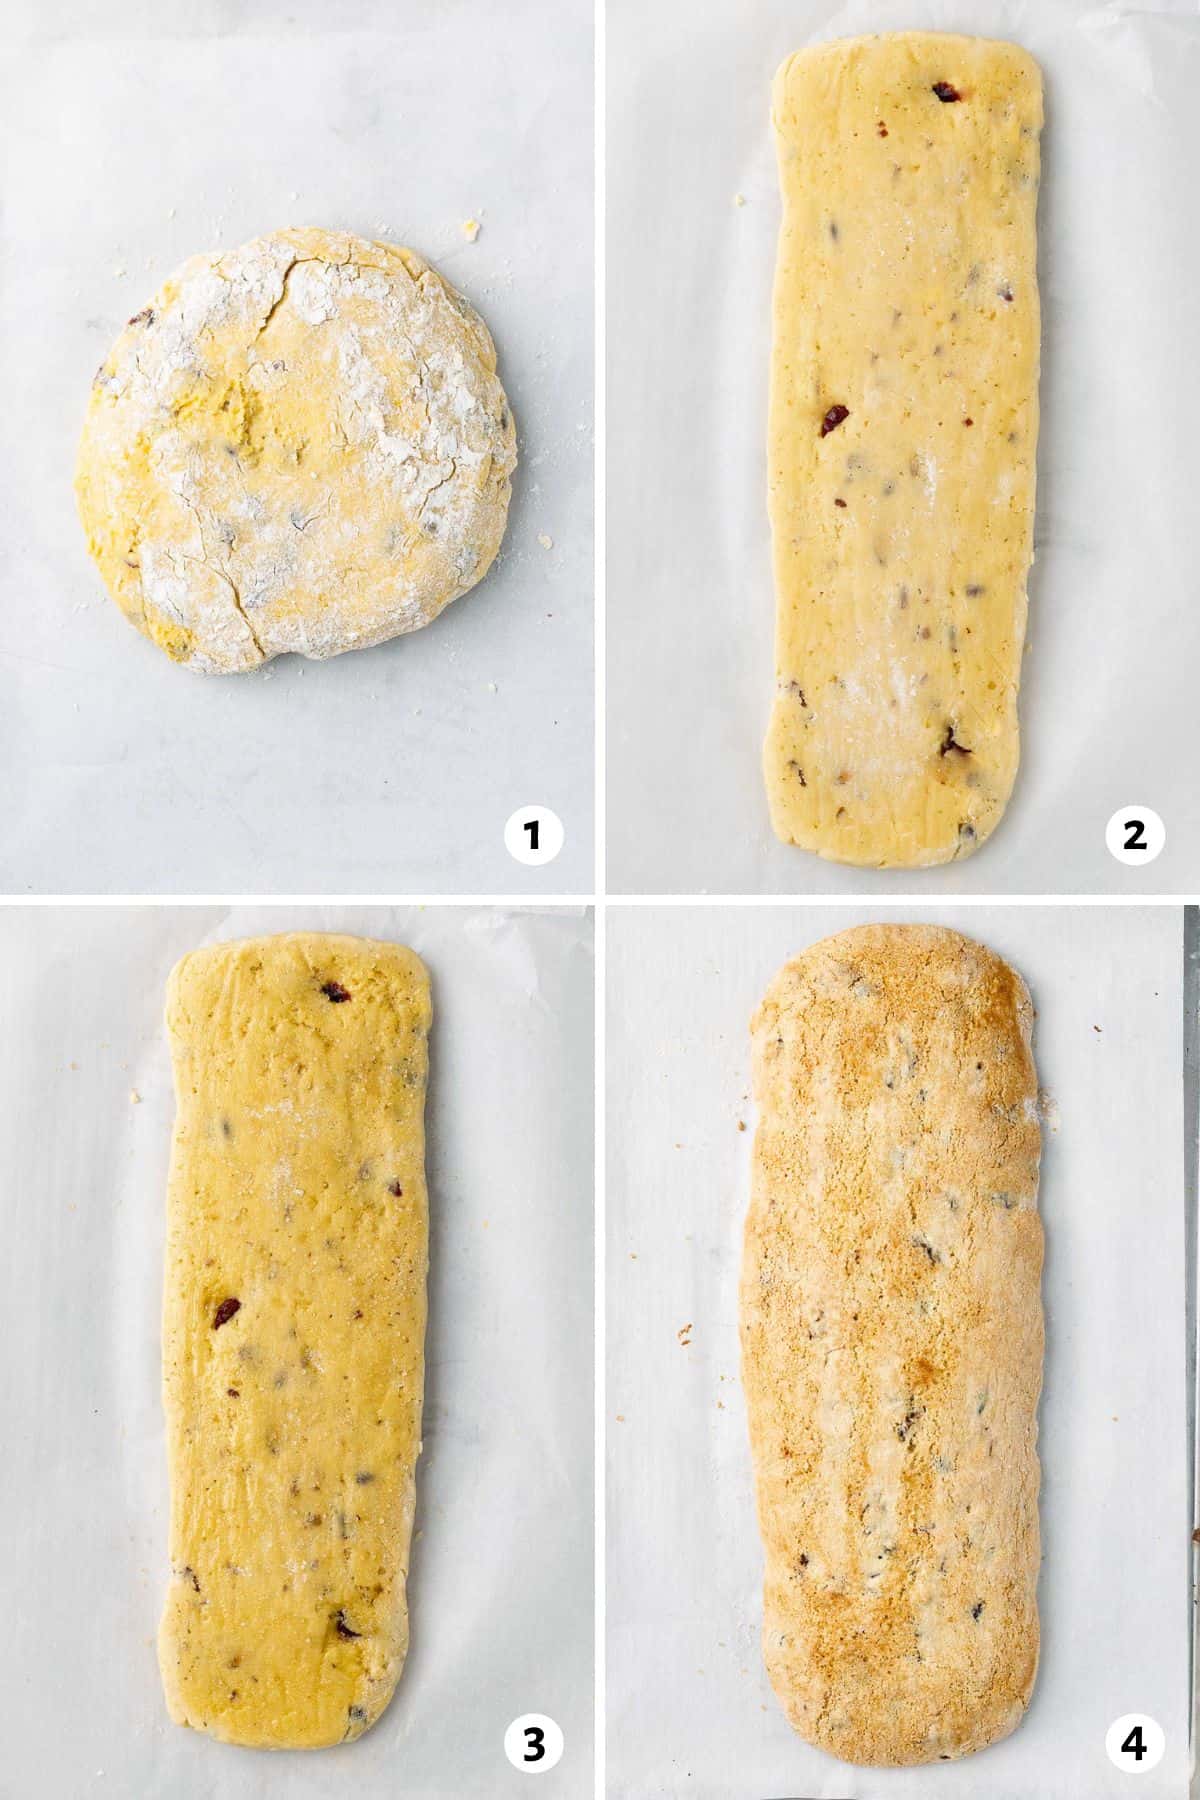 4 image collage shaping and baking dough: 1- chilled dough on a parchment lined baking sheet, 2- after shaping into a long, wide log, 3- after brushing with egg white and sugar, 4- after baking.